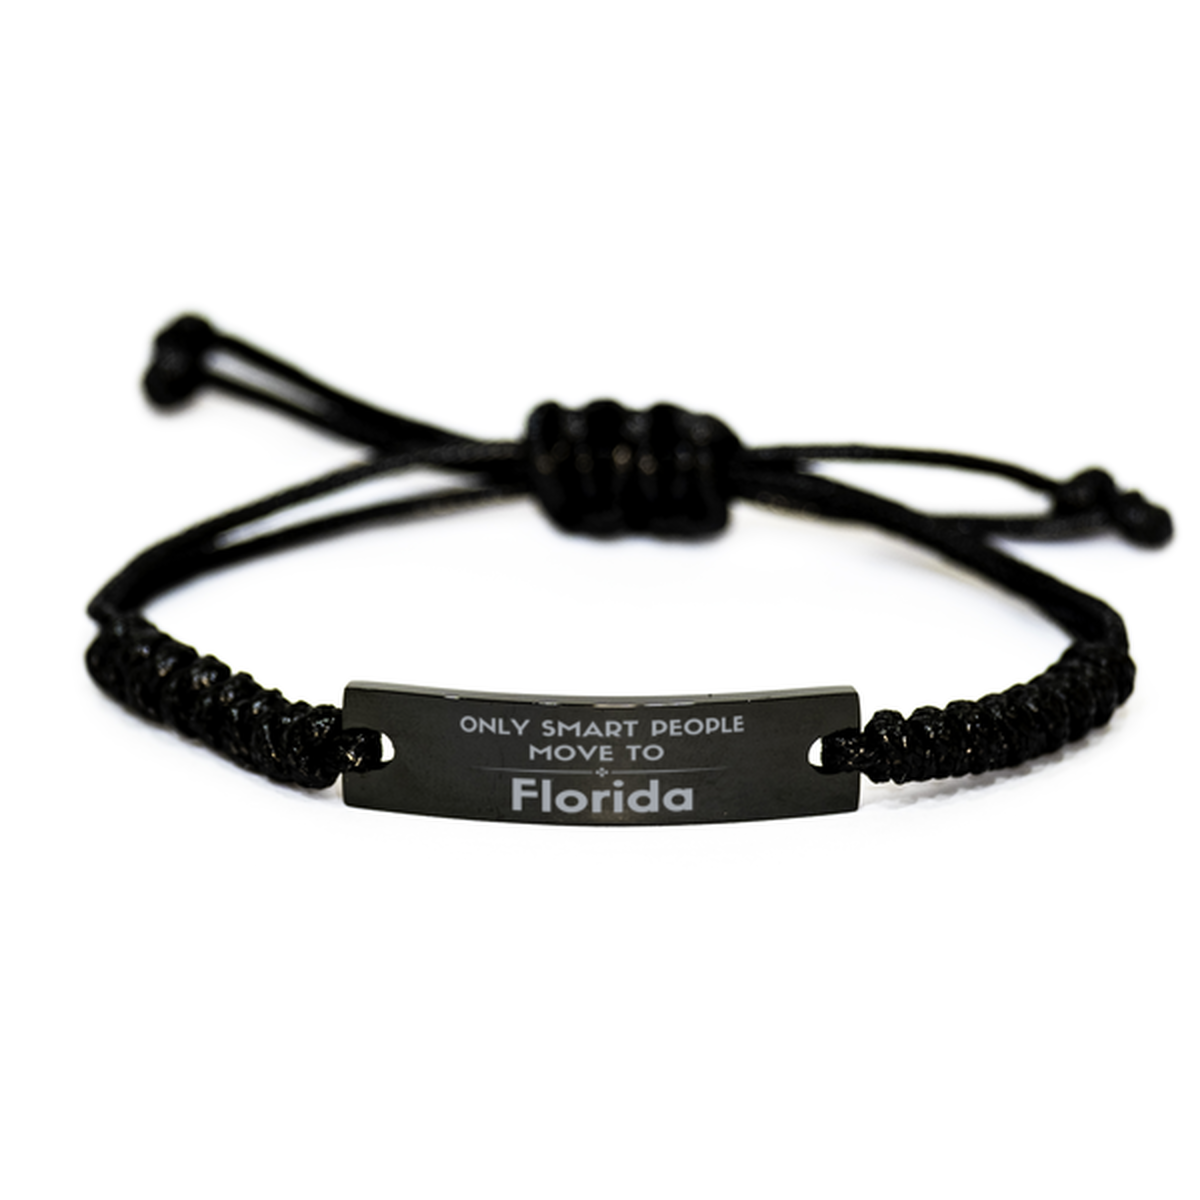 Only smart people move to Florida Black Rope Bracelet, Gag Gifts For Florida, Move to Florida Gifts for Friends Coworker Funny Saying Quote